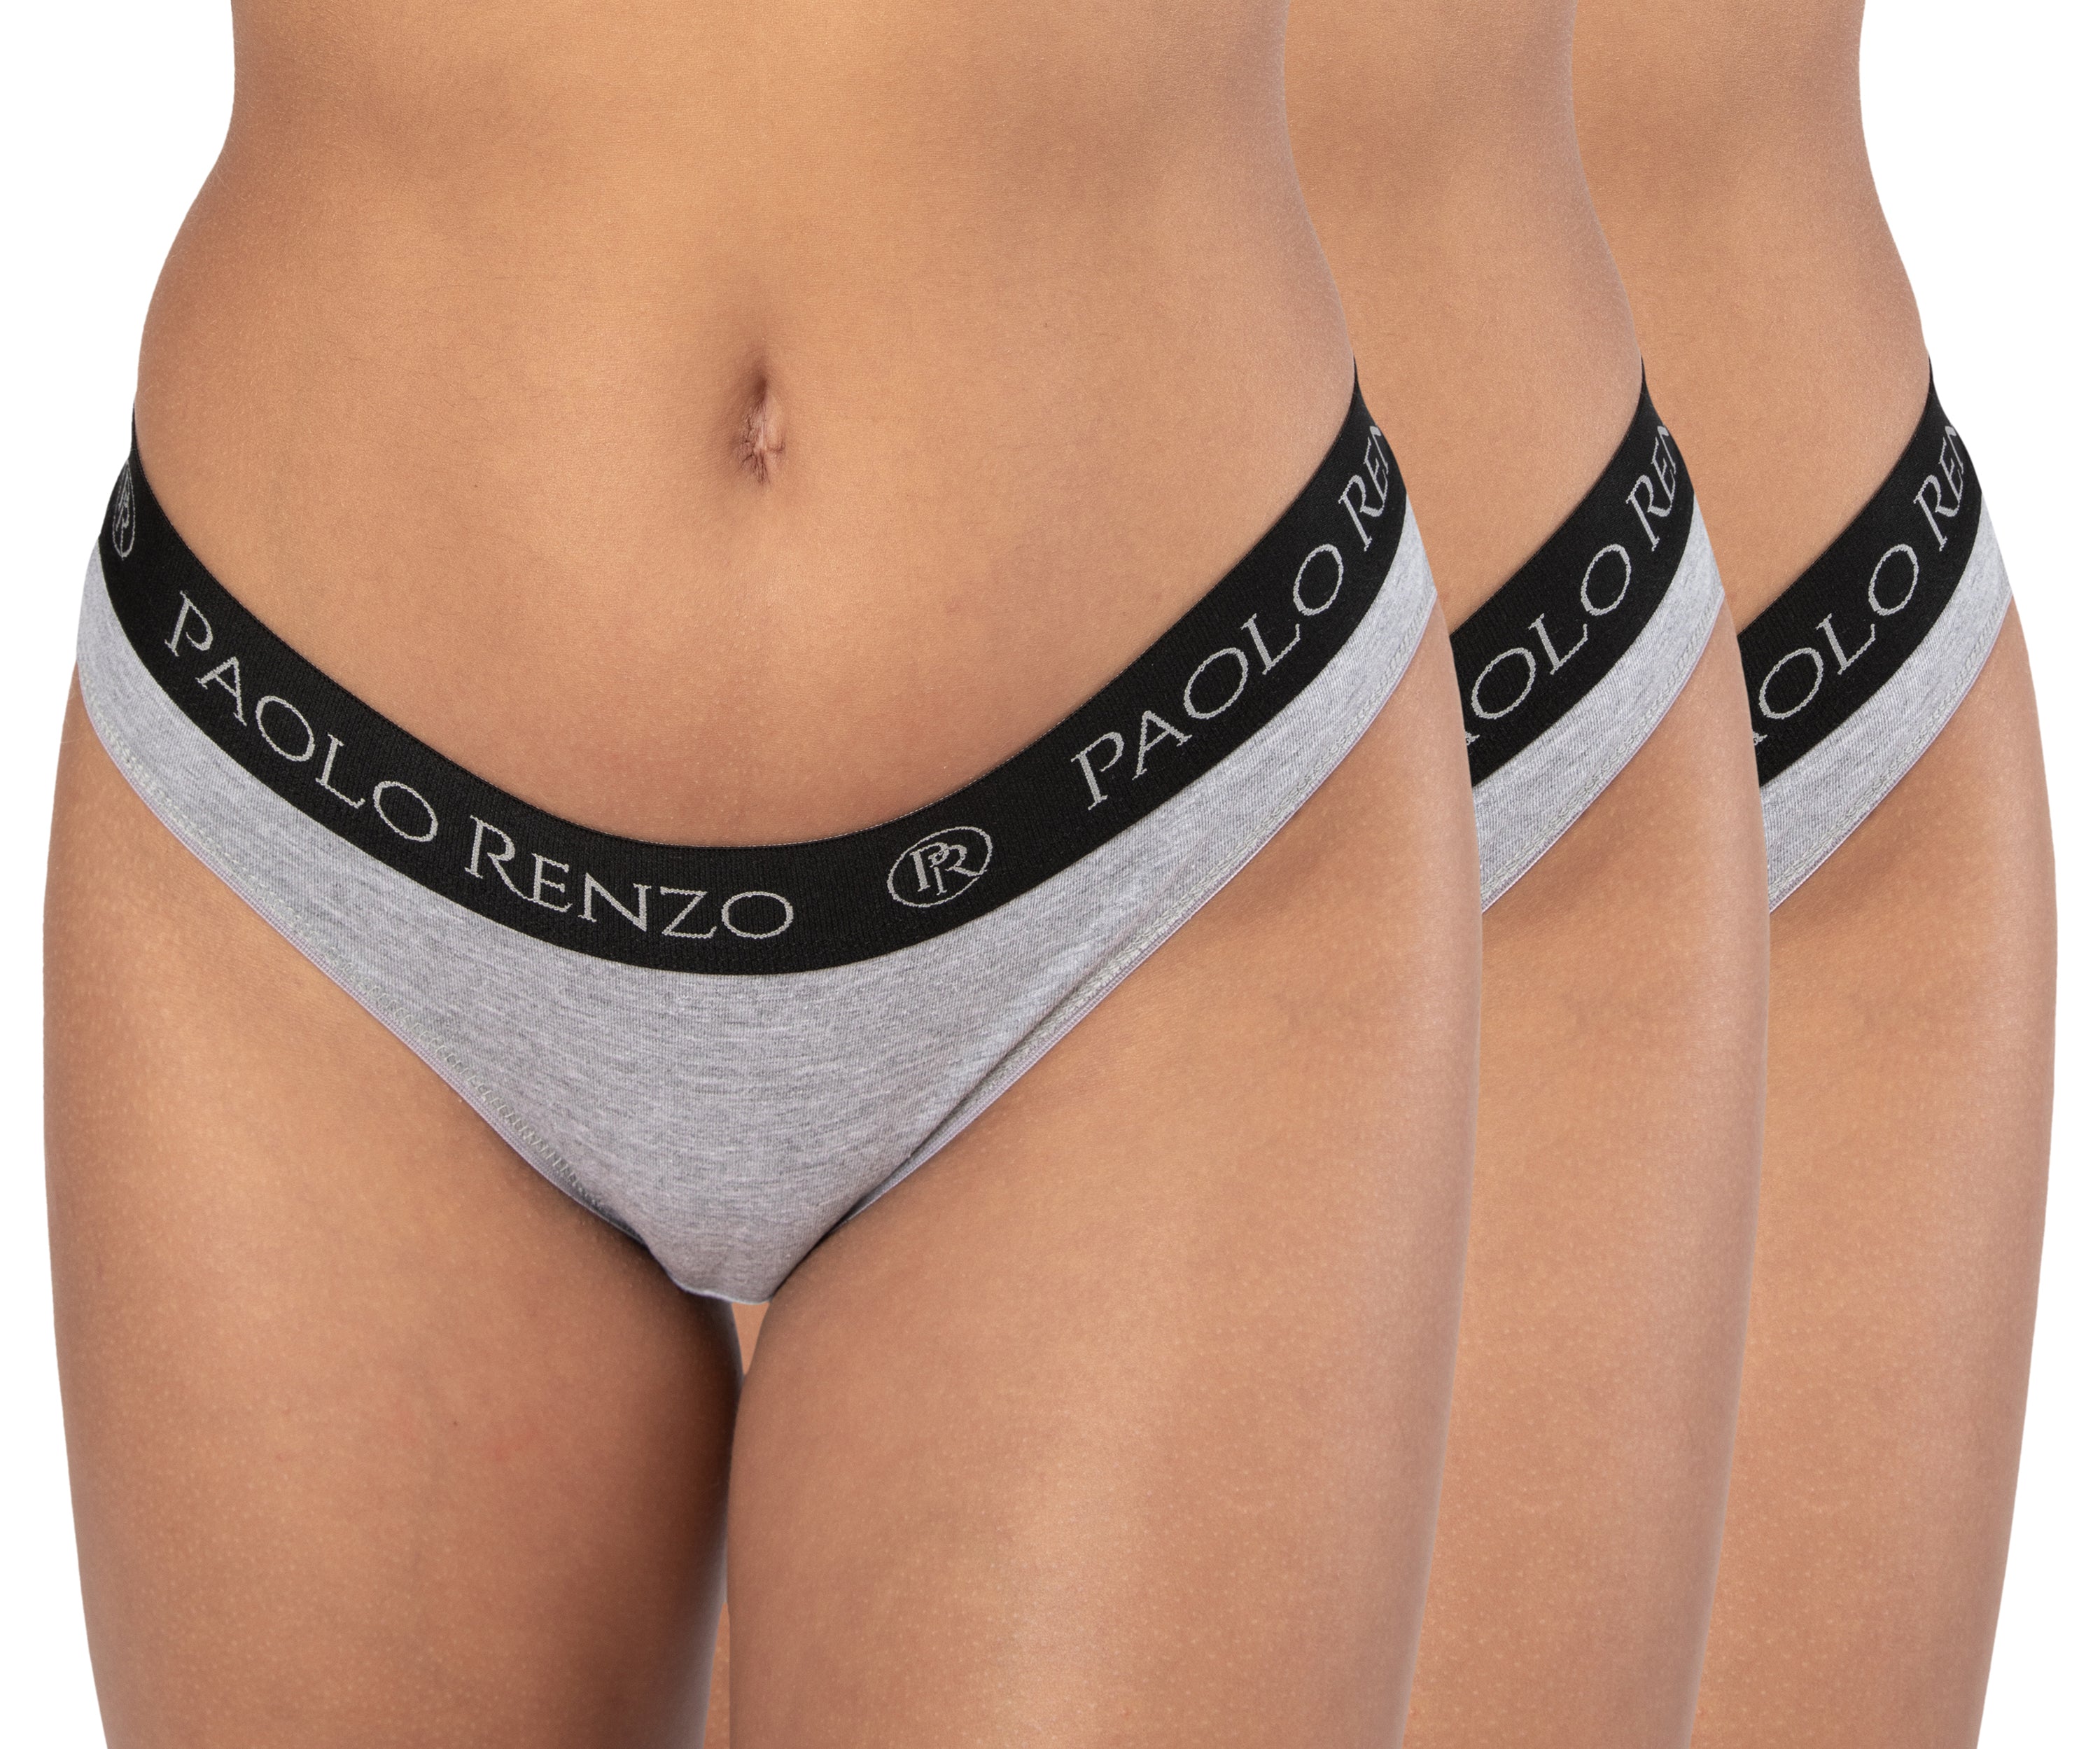 Paolo Renzo® women's cotton thong SPORT LINE 3 or 6 pairs - sizes S, M, L,  XL - Gray / S / 3